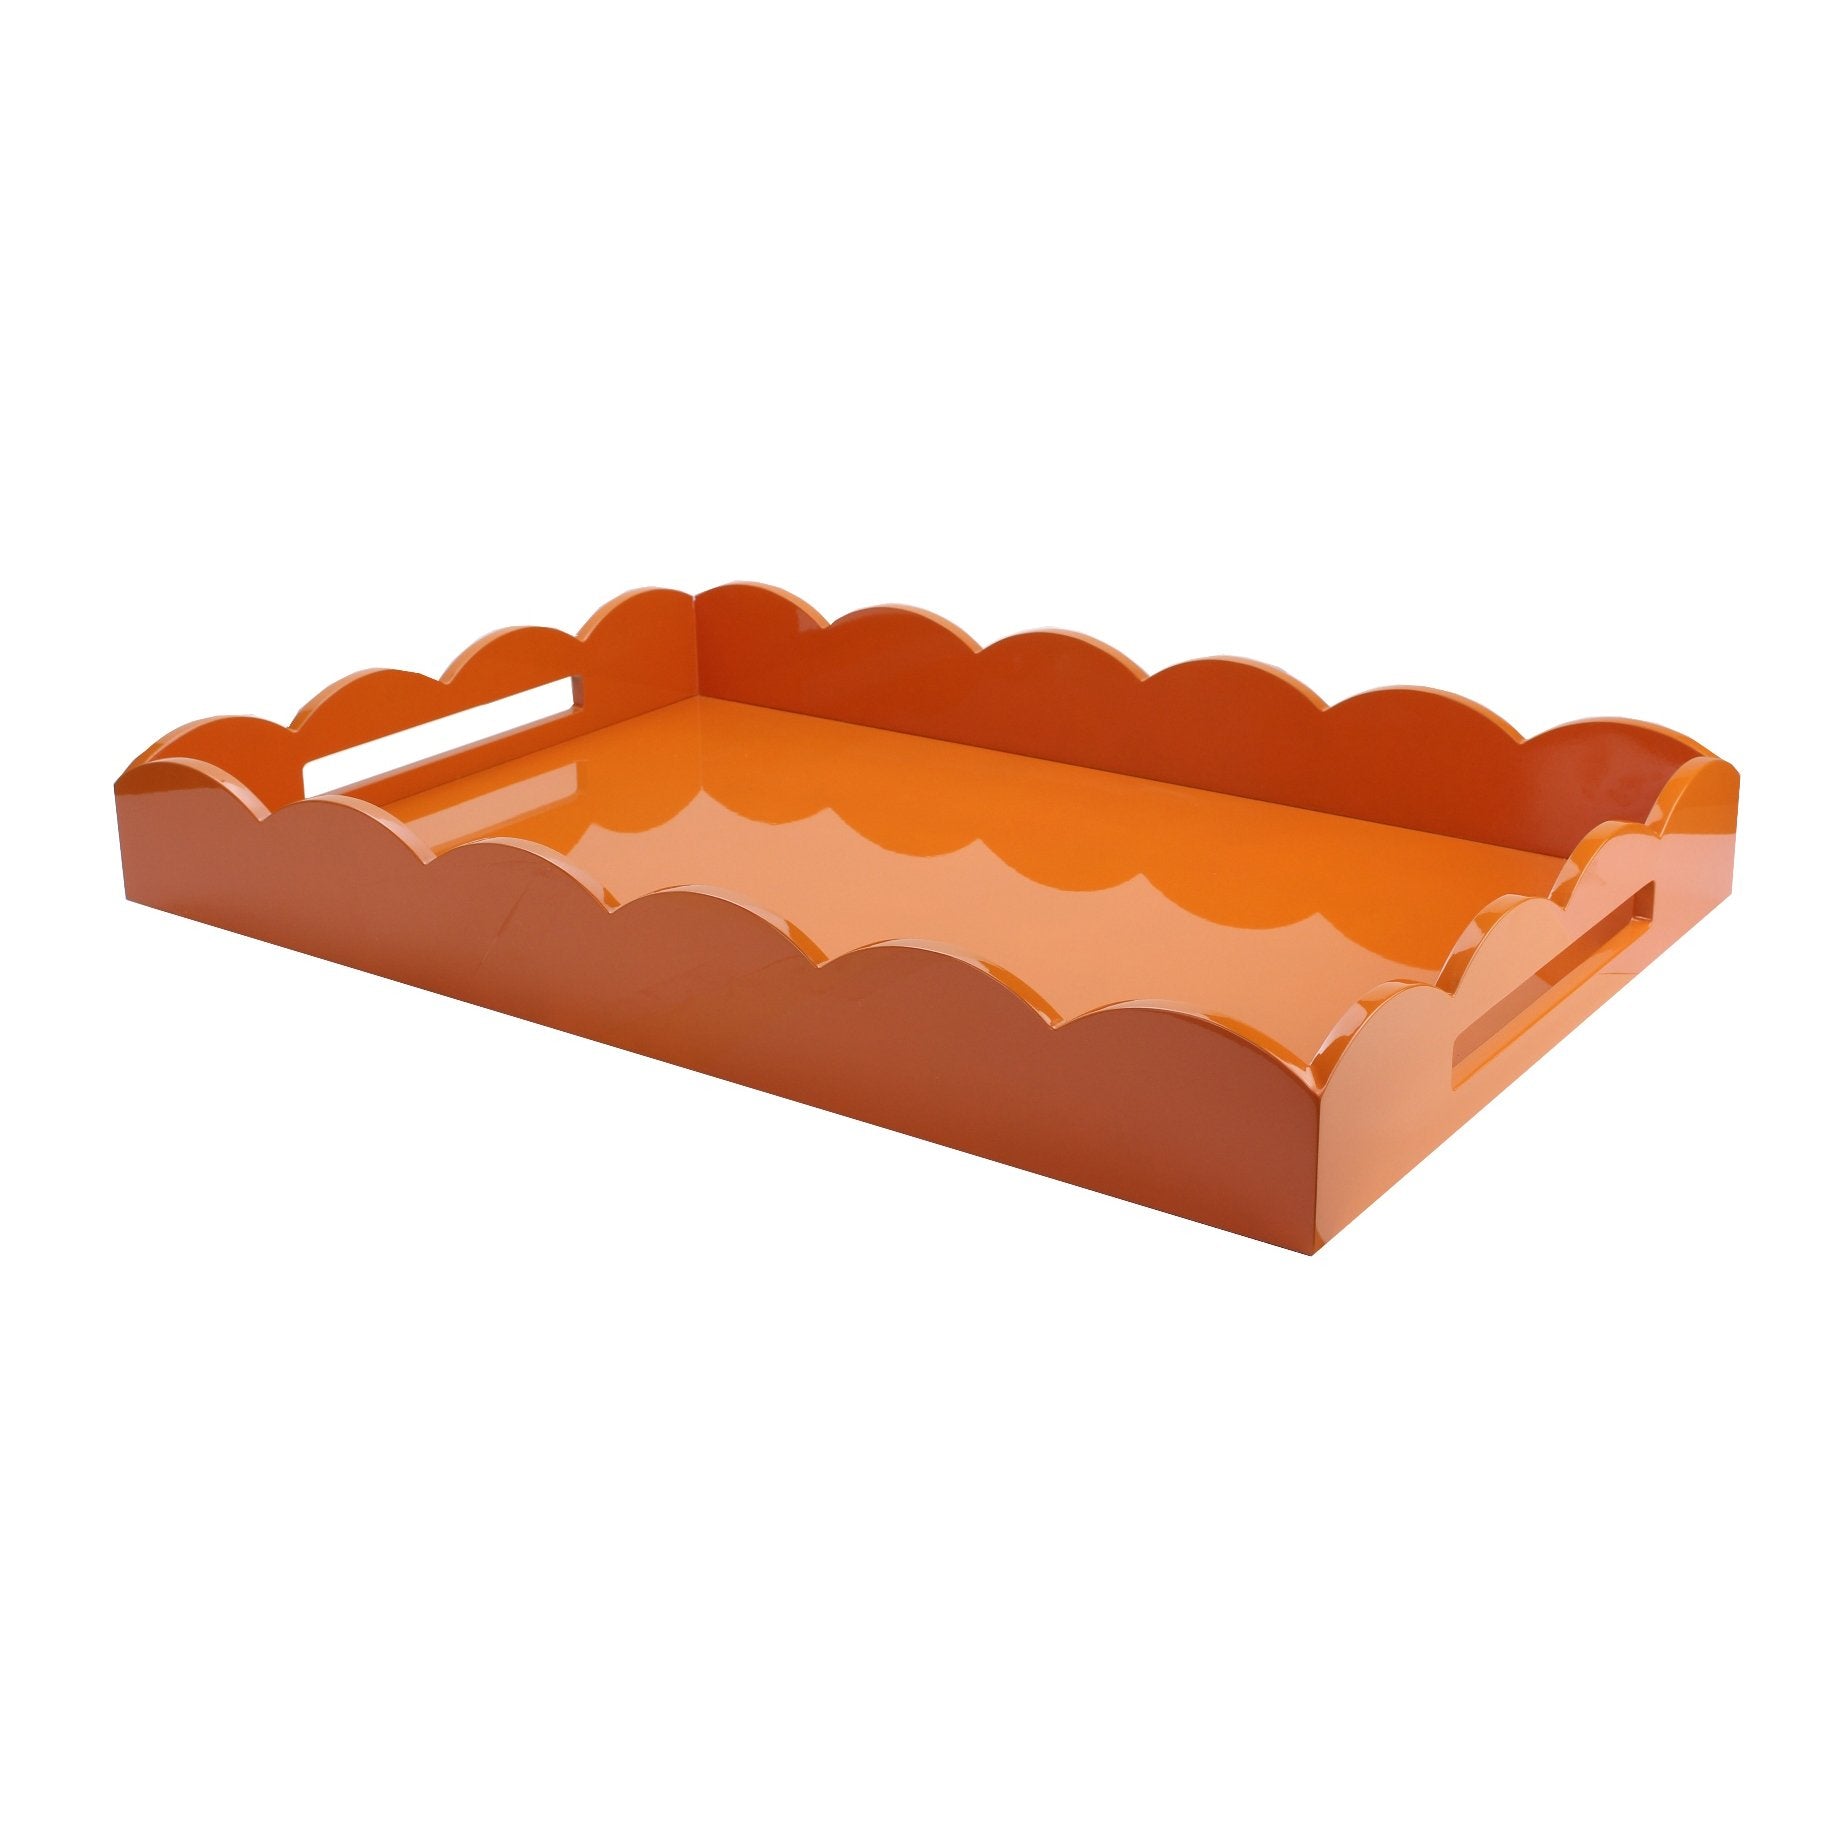 Large orange lacquer tray with a scalloped edge